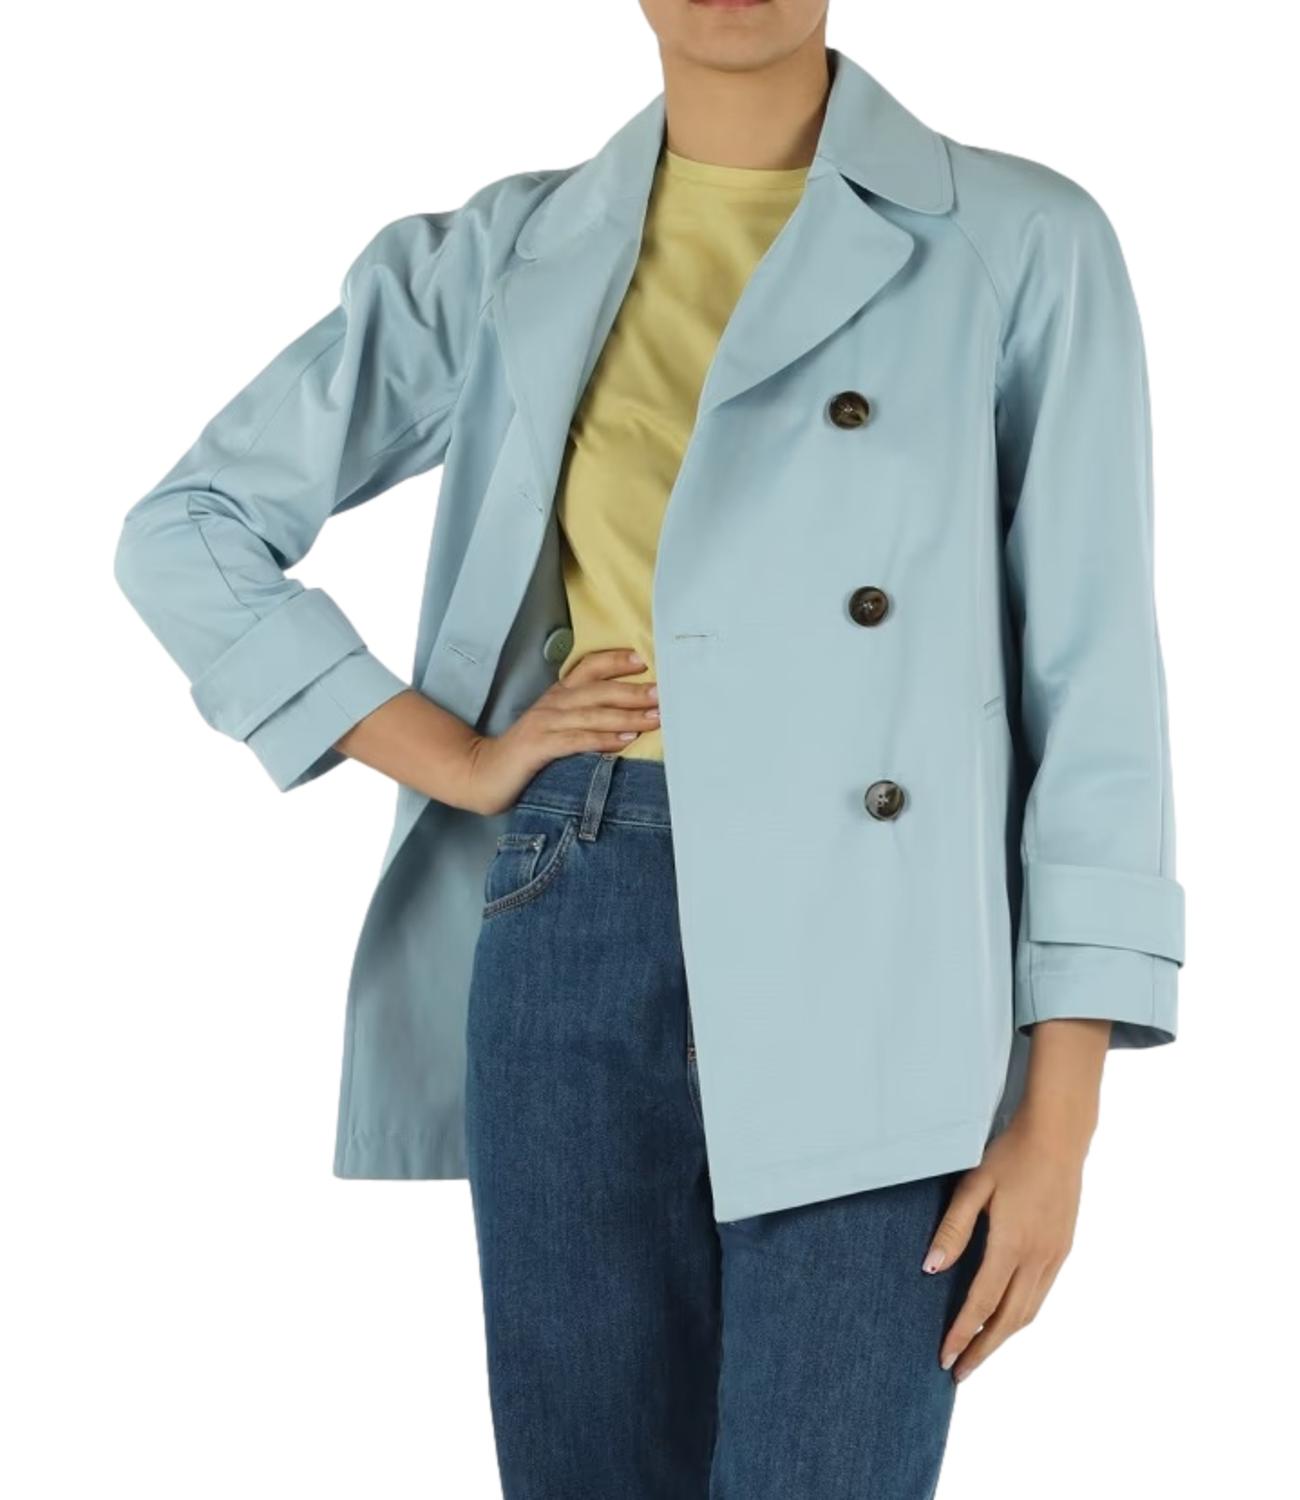 Impermeabile/trench WEST azzurro donna